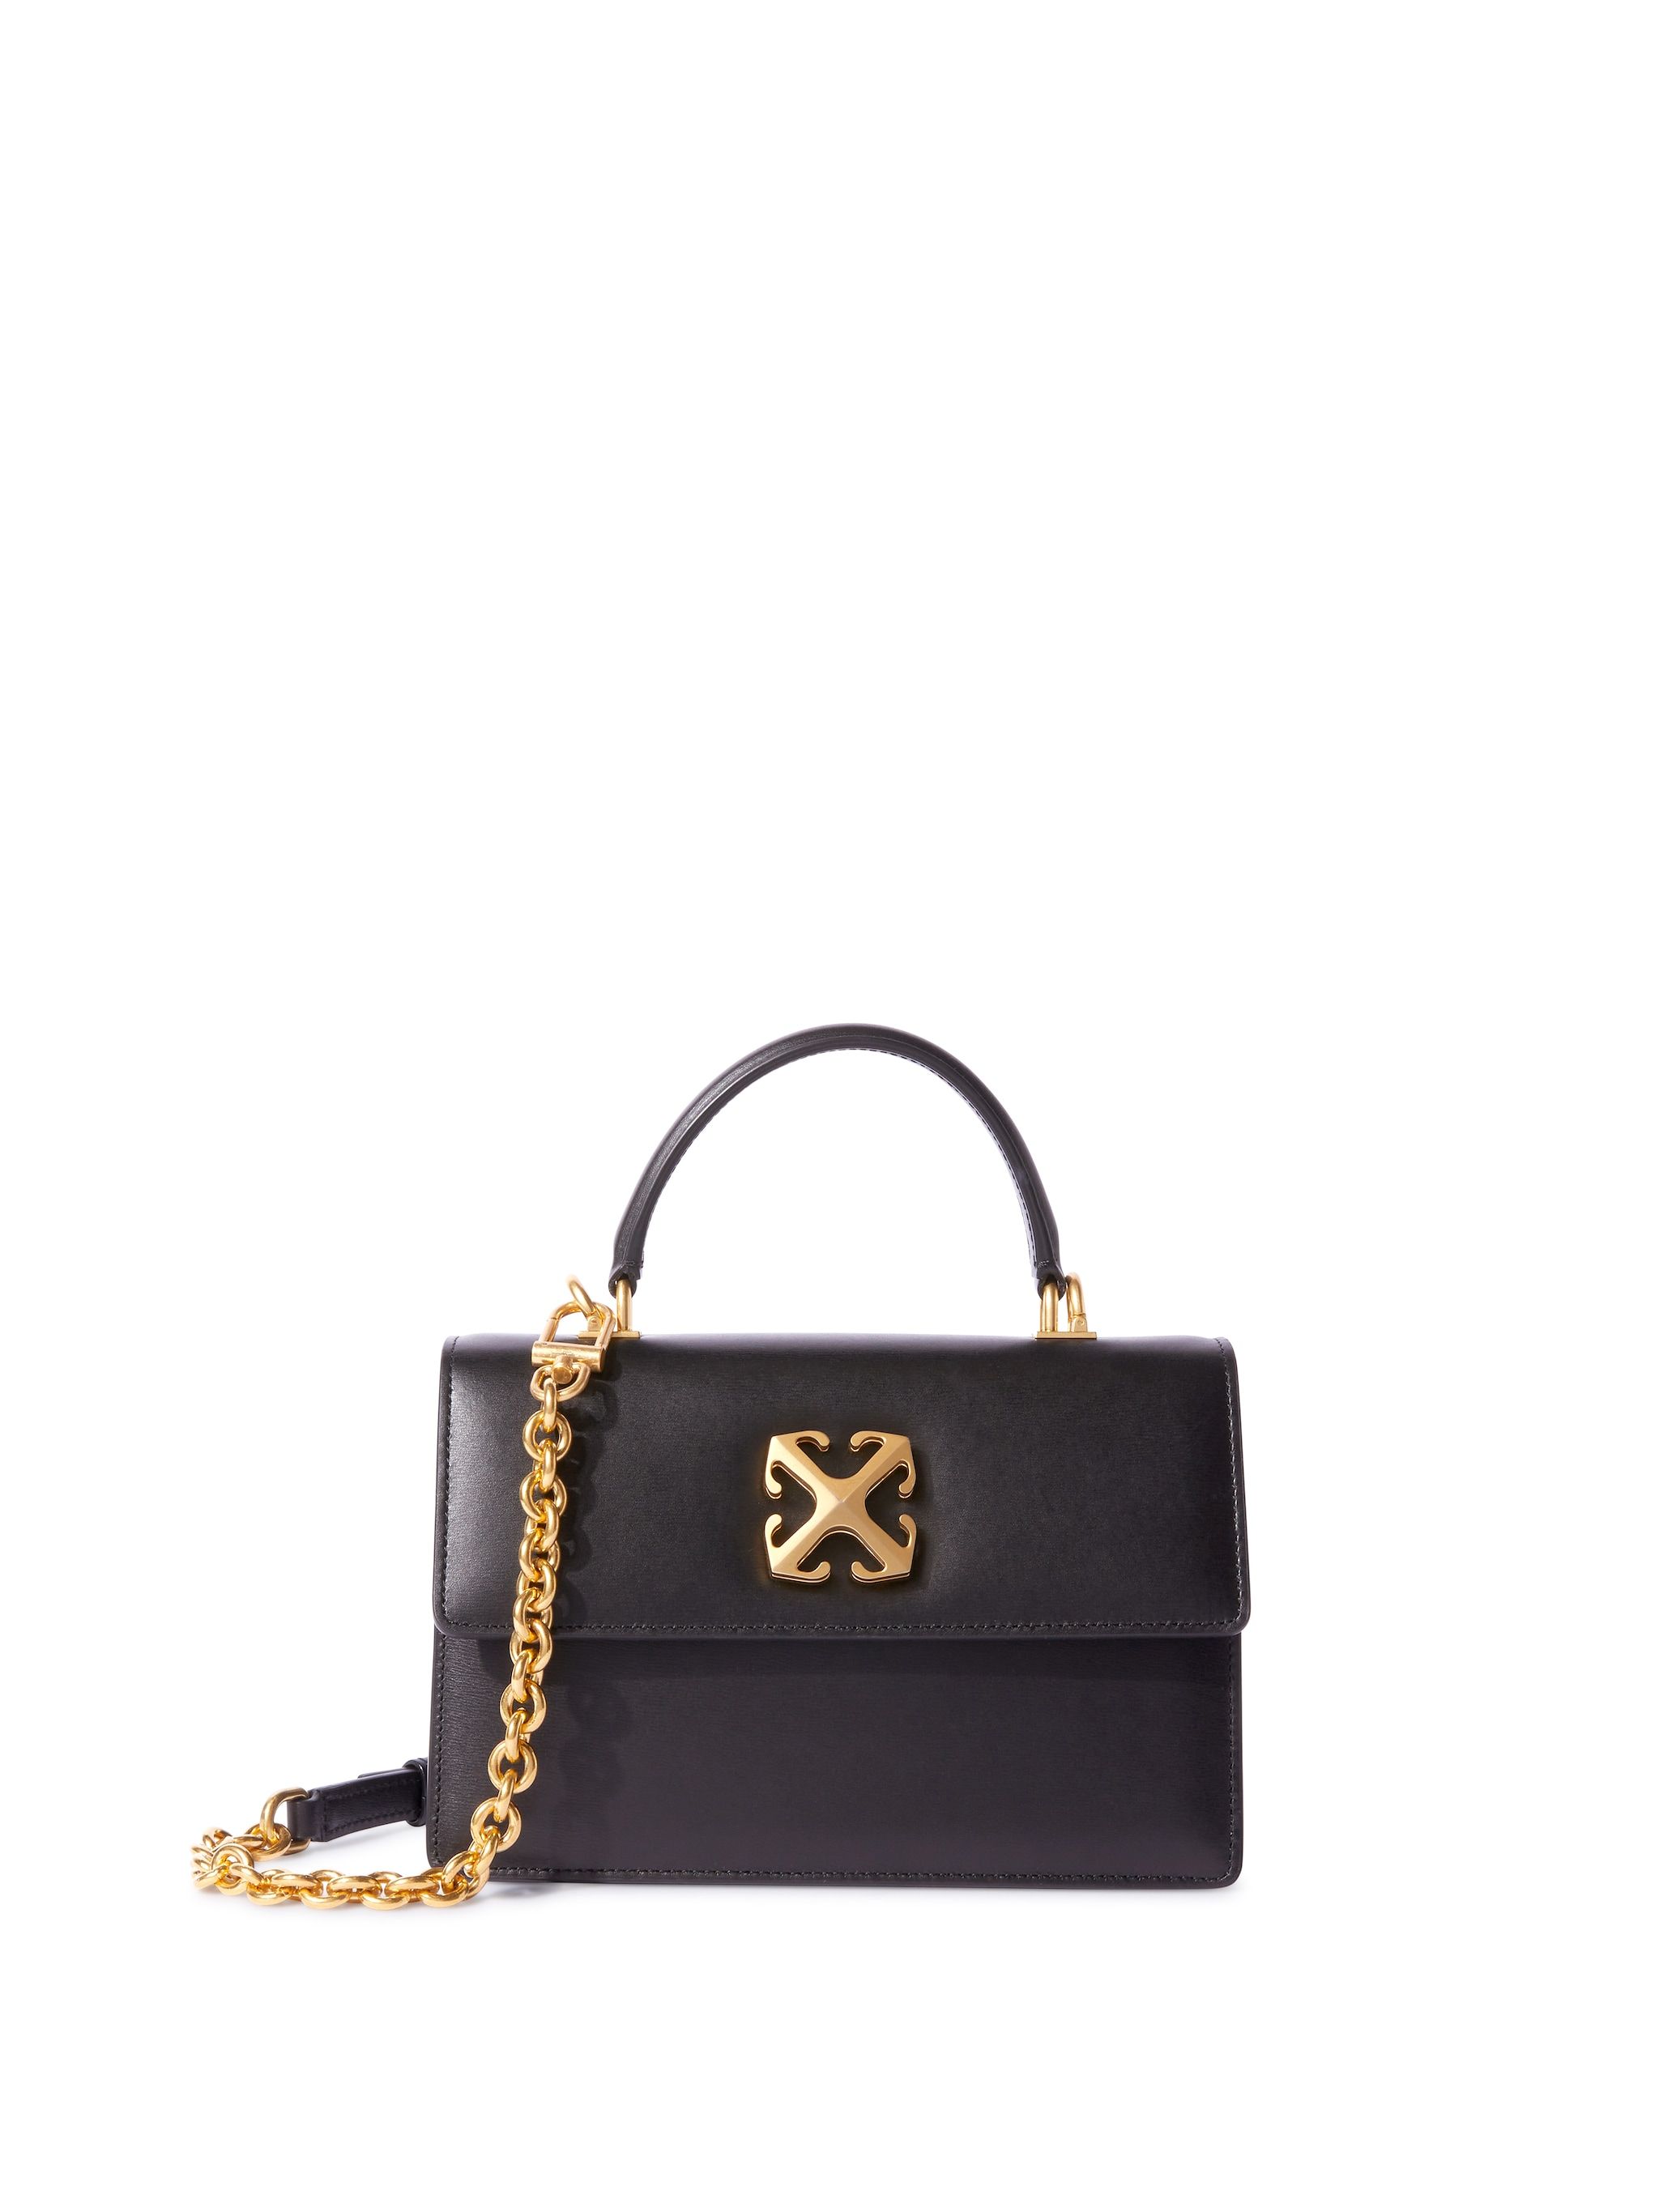 7 gorgeous black bags hiding in Coach Outlet's spring sale